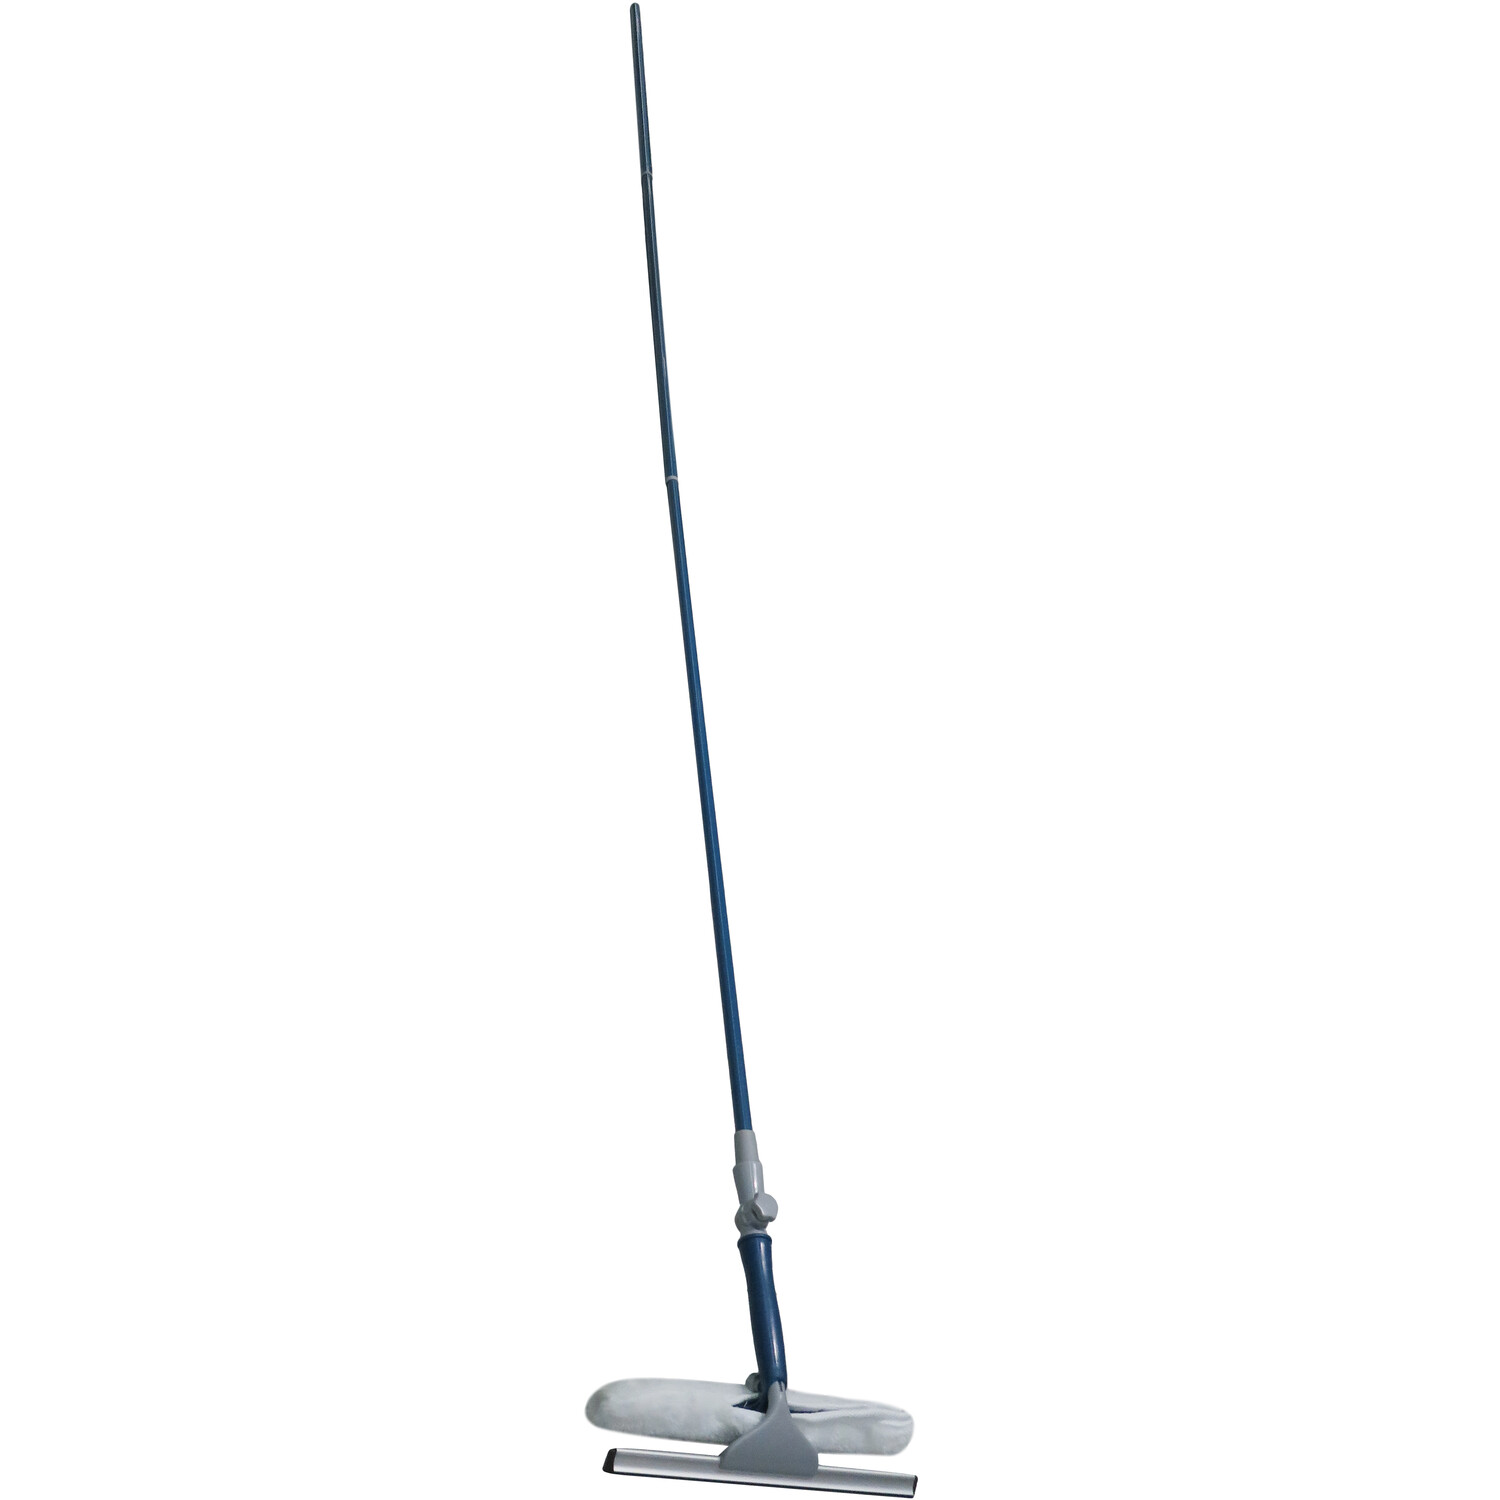 Extendable Pole Window Cleaning Squeegee Image 3